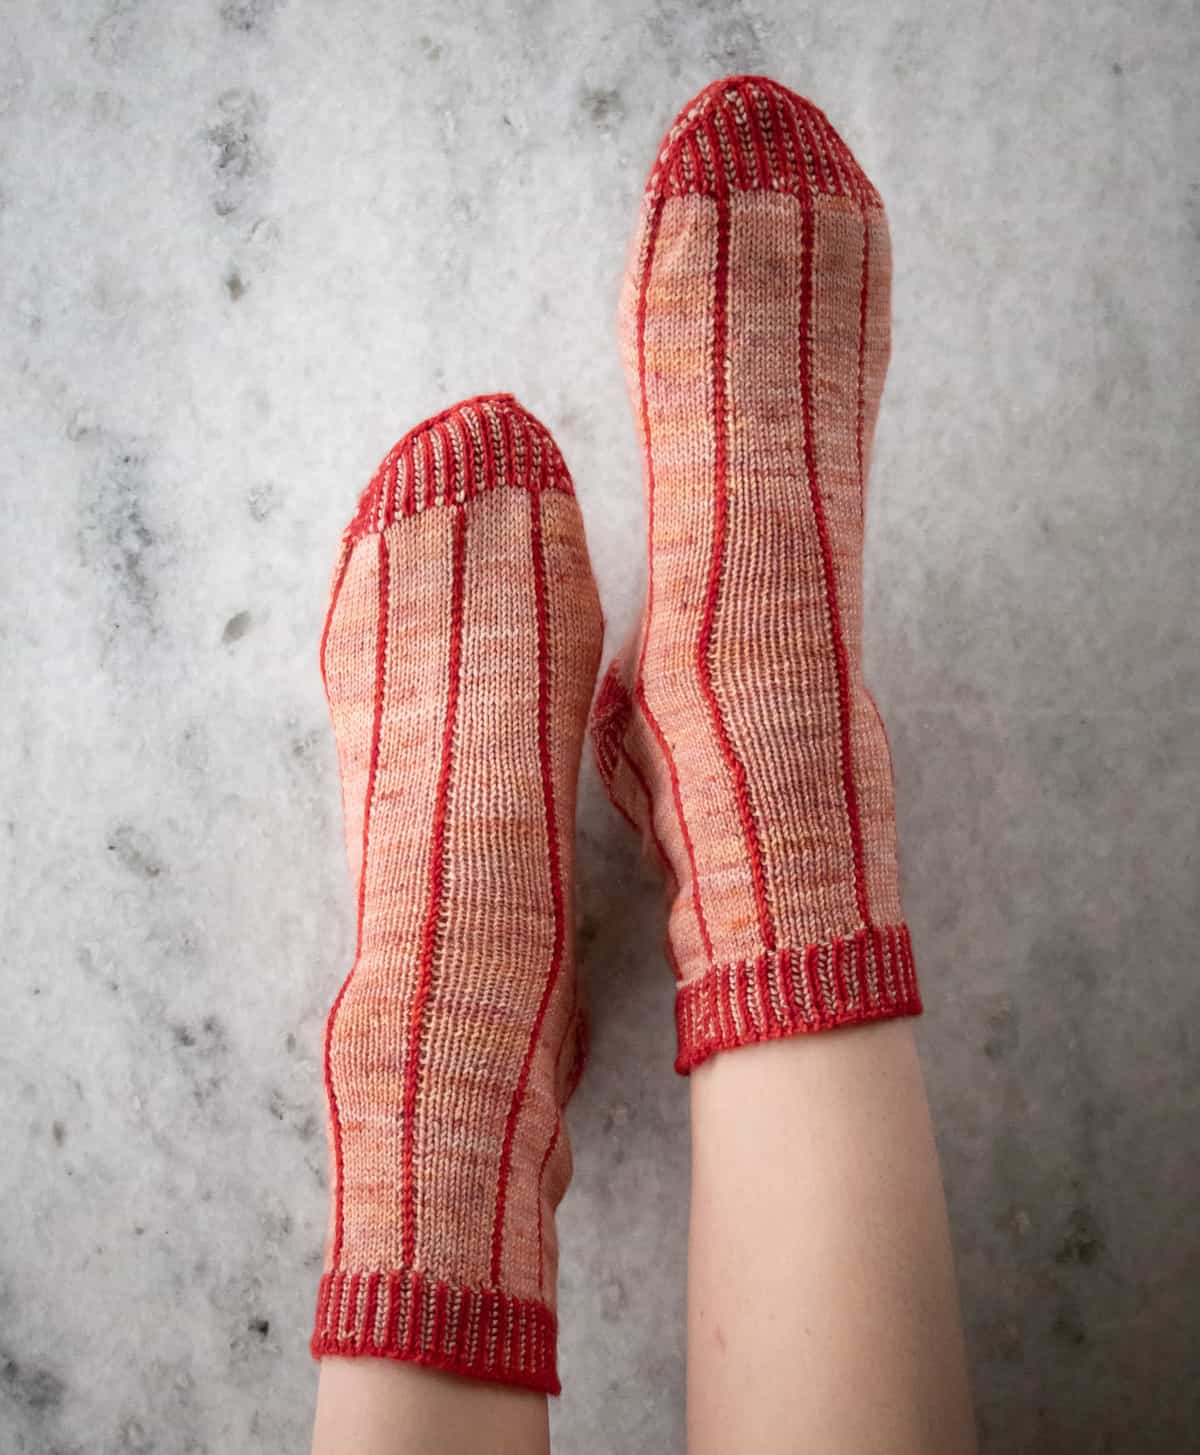 April Socks Knitting Pattern Main Image being worn on feet in front of a marble background